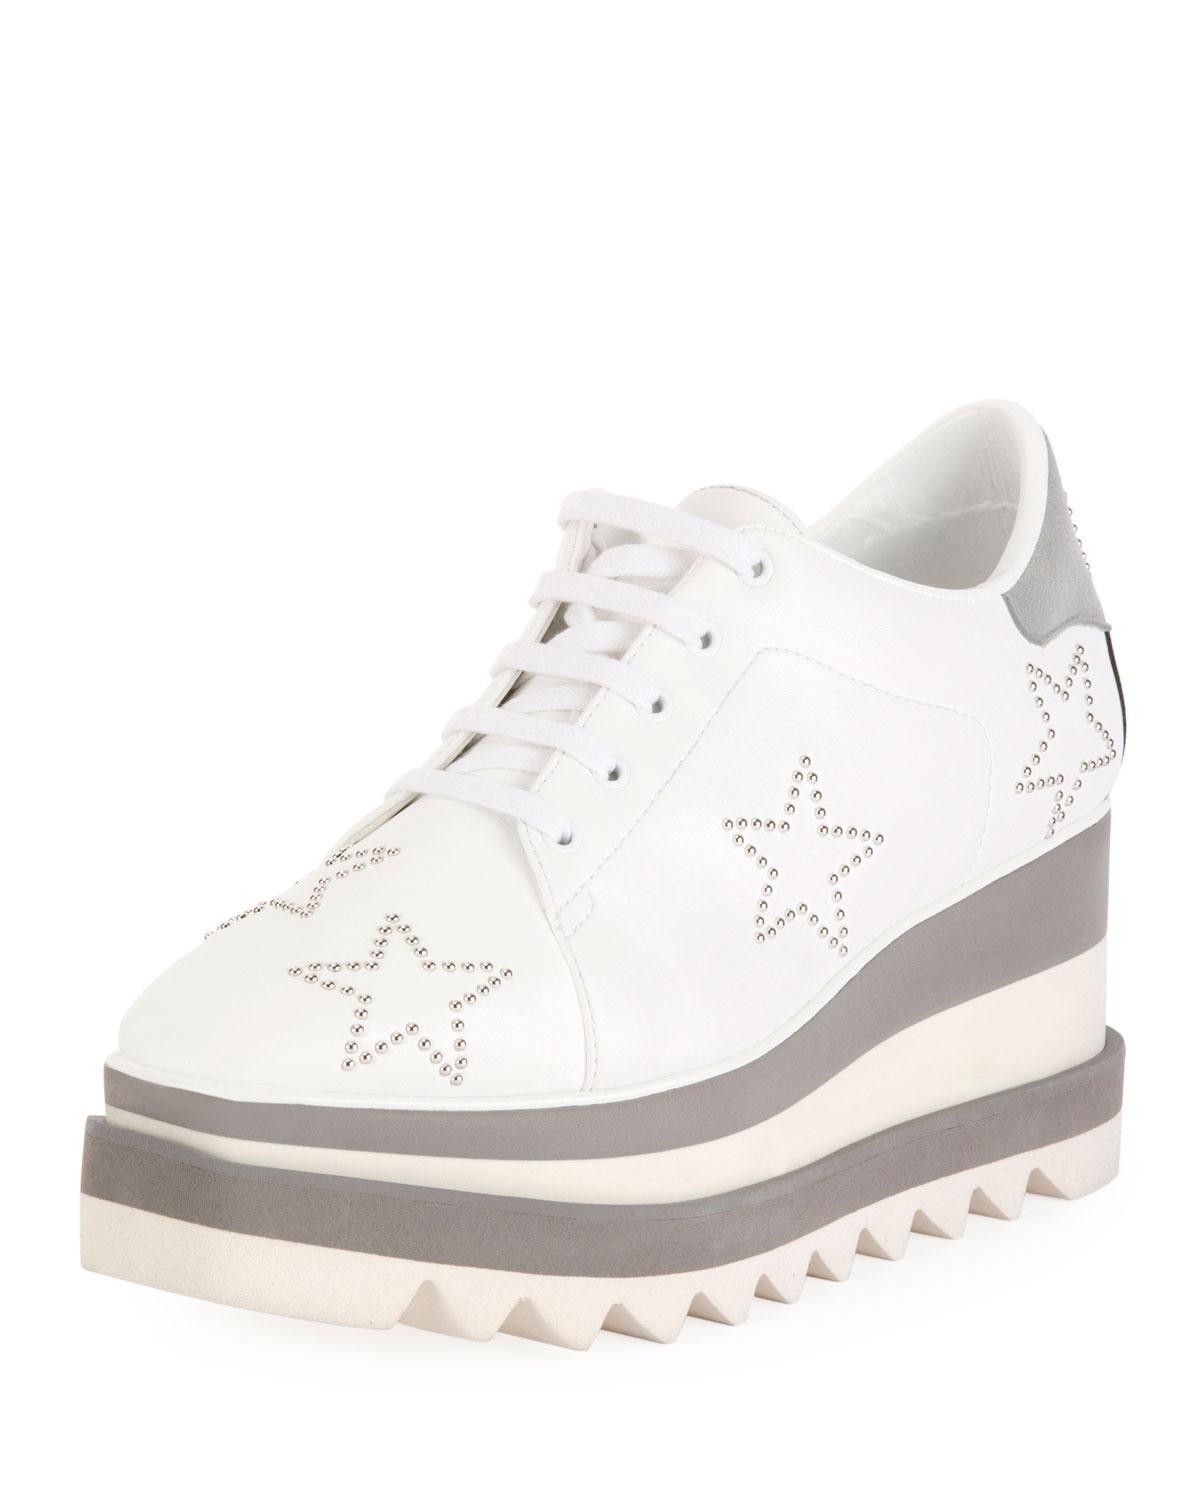 white platform sneakers with stars